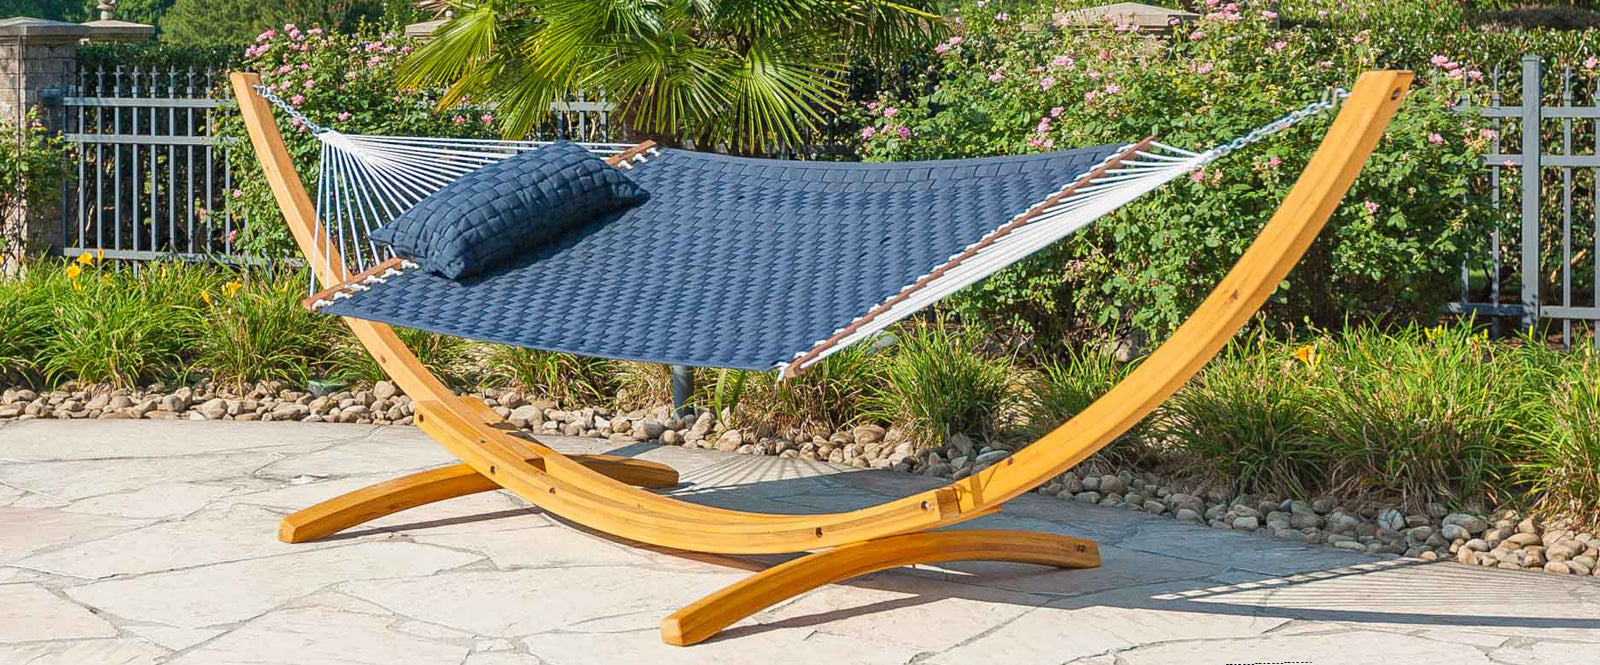 Patio Accessories such as Umbrellas, Firepits, Hammocks and more to compliment any style.